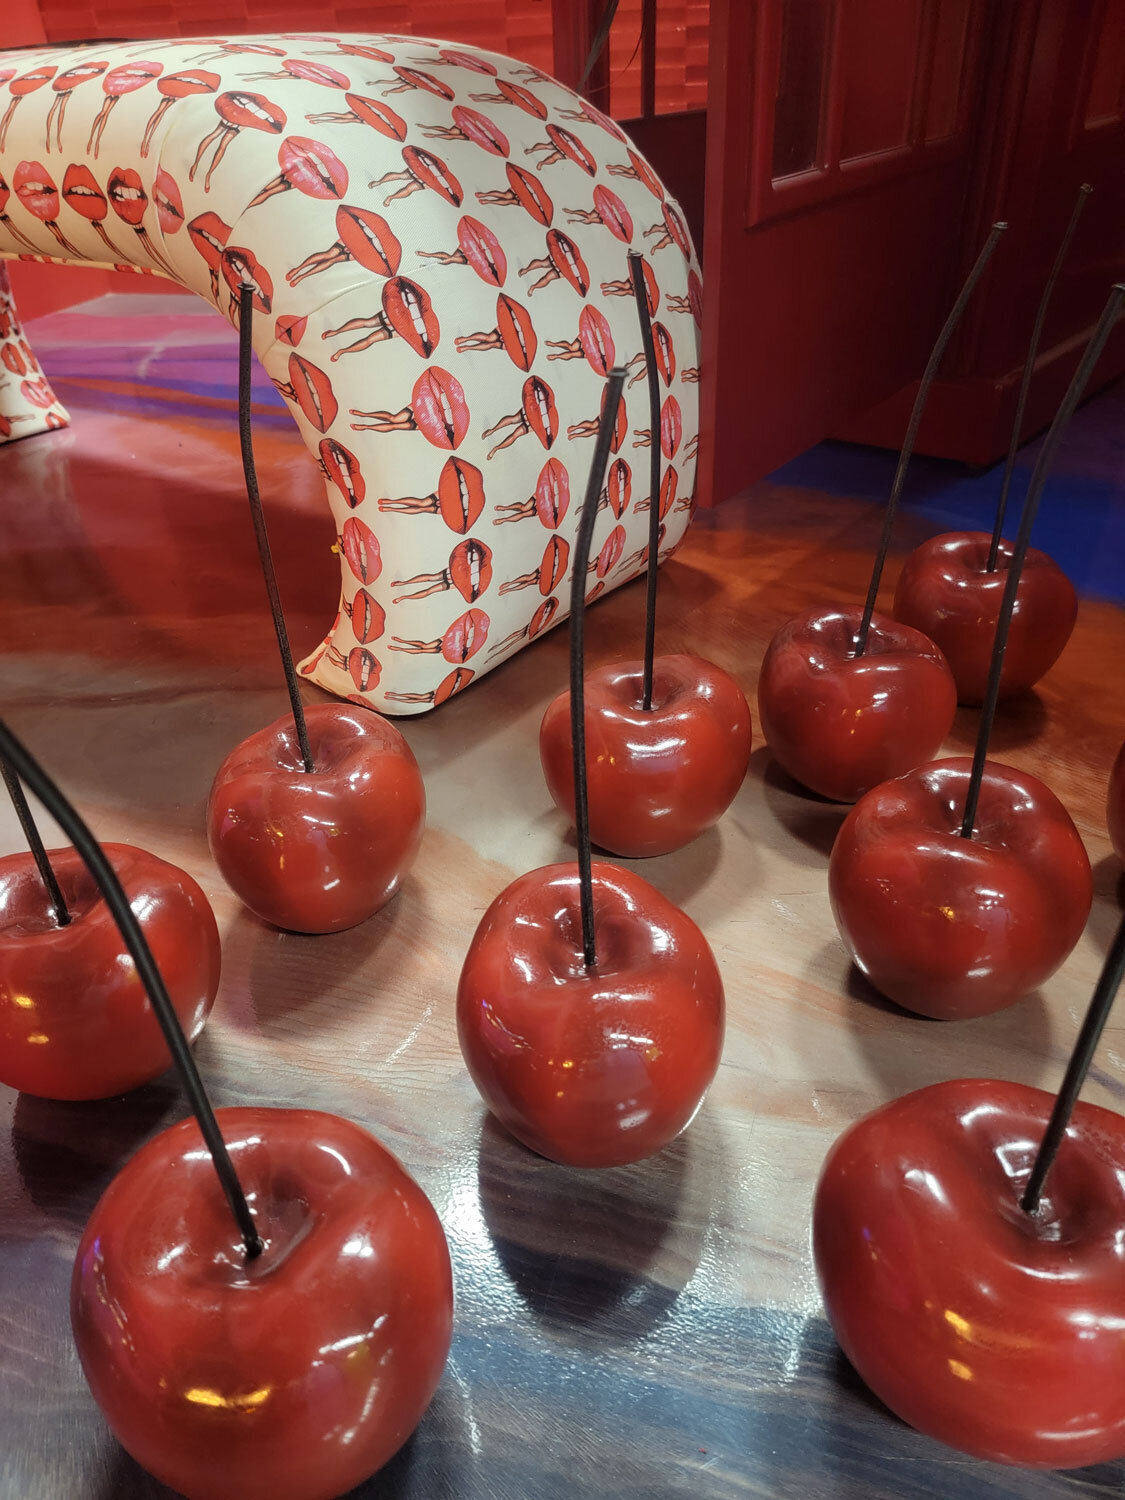 Cool life sized cherries and blow up bench